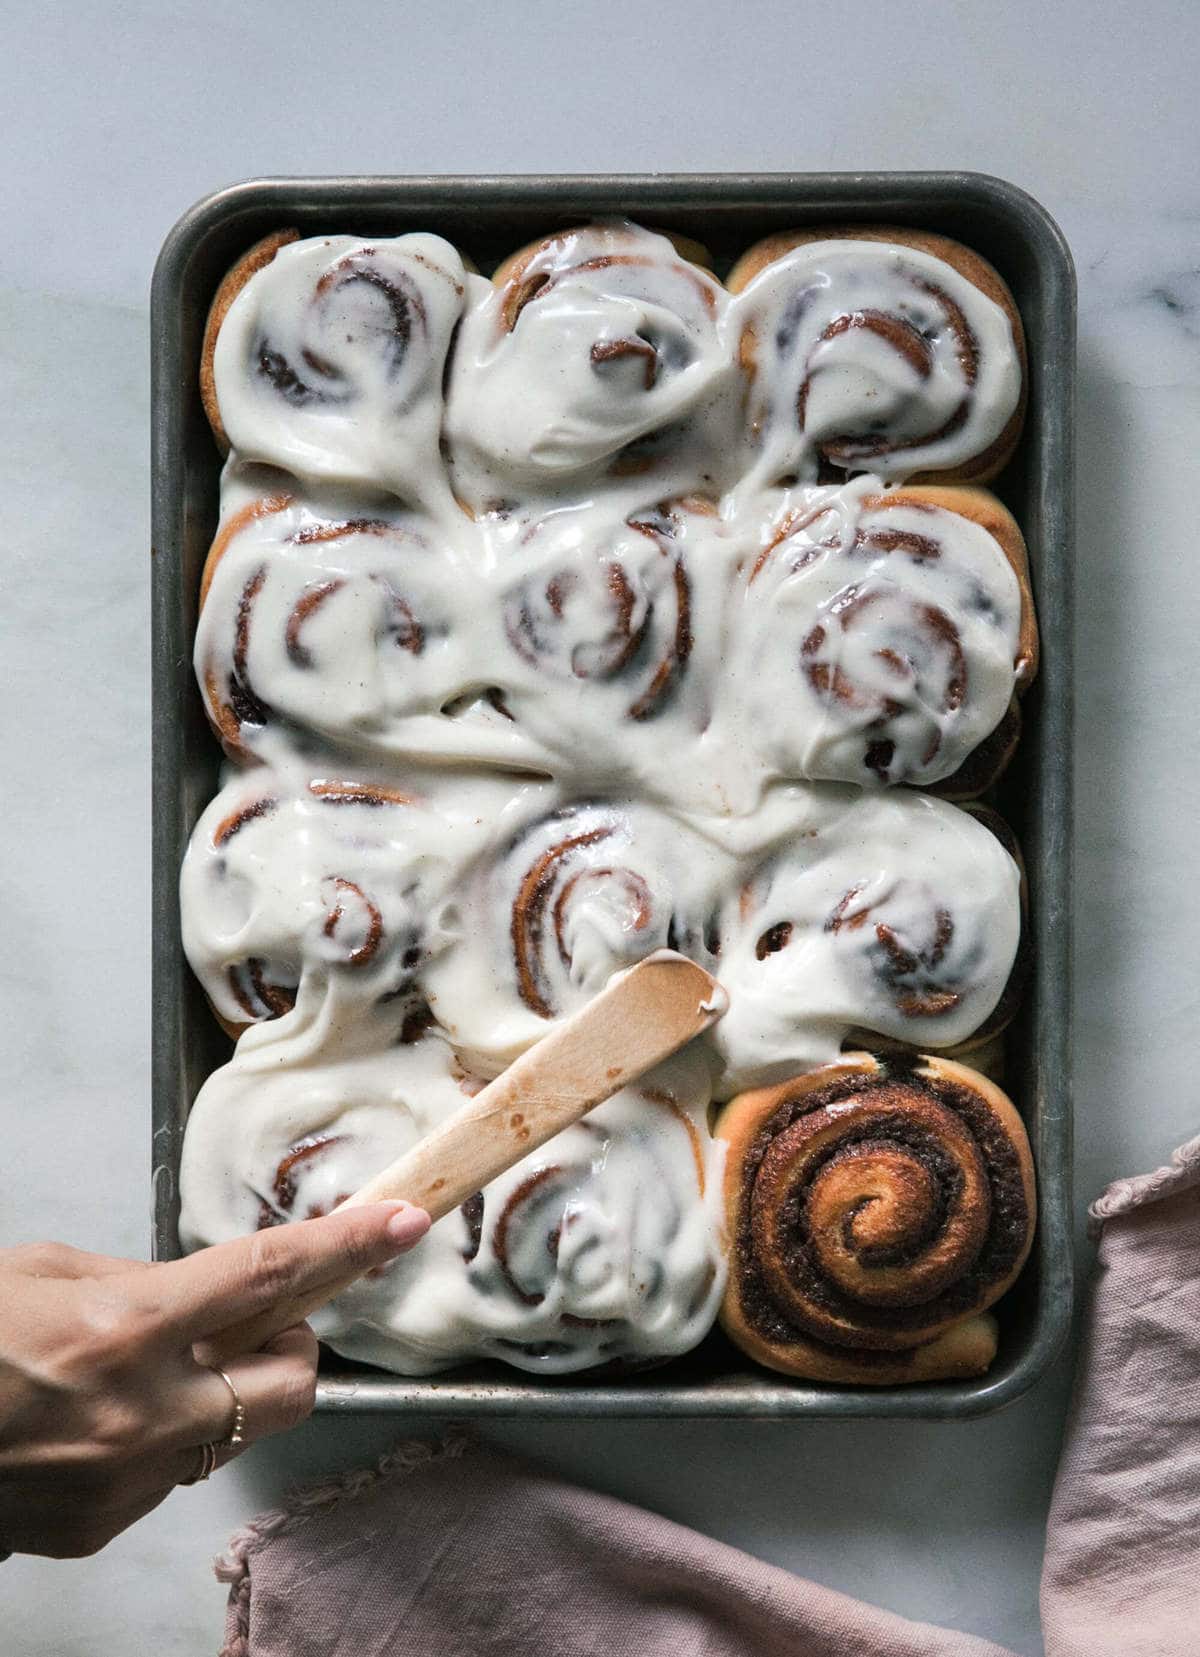 warm cinnamon rolls with frosting being smothered on